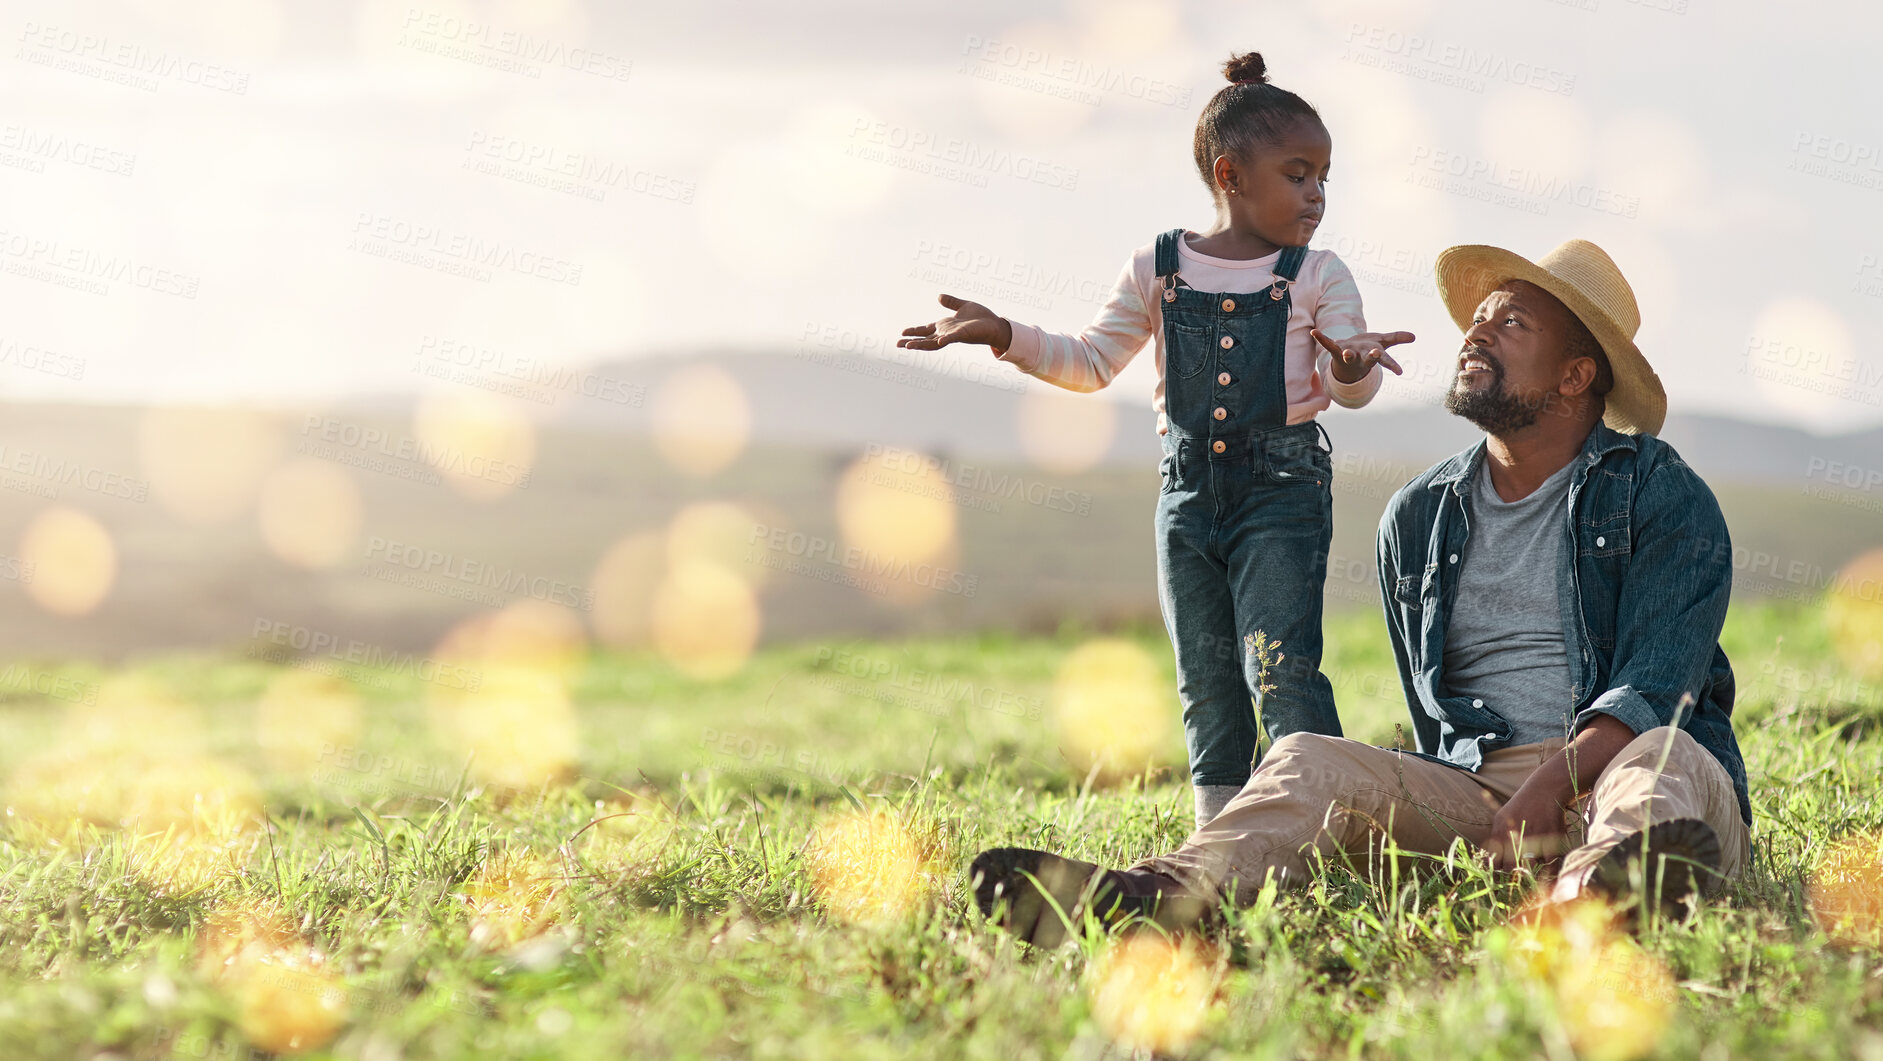 Buy stock photo Bonding, relax and father and child on a field for playing, adventure and conversation in nature. Agriculture, communication and African dad talking to a playful girl on the grass in the countryside